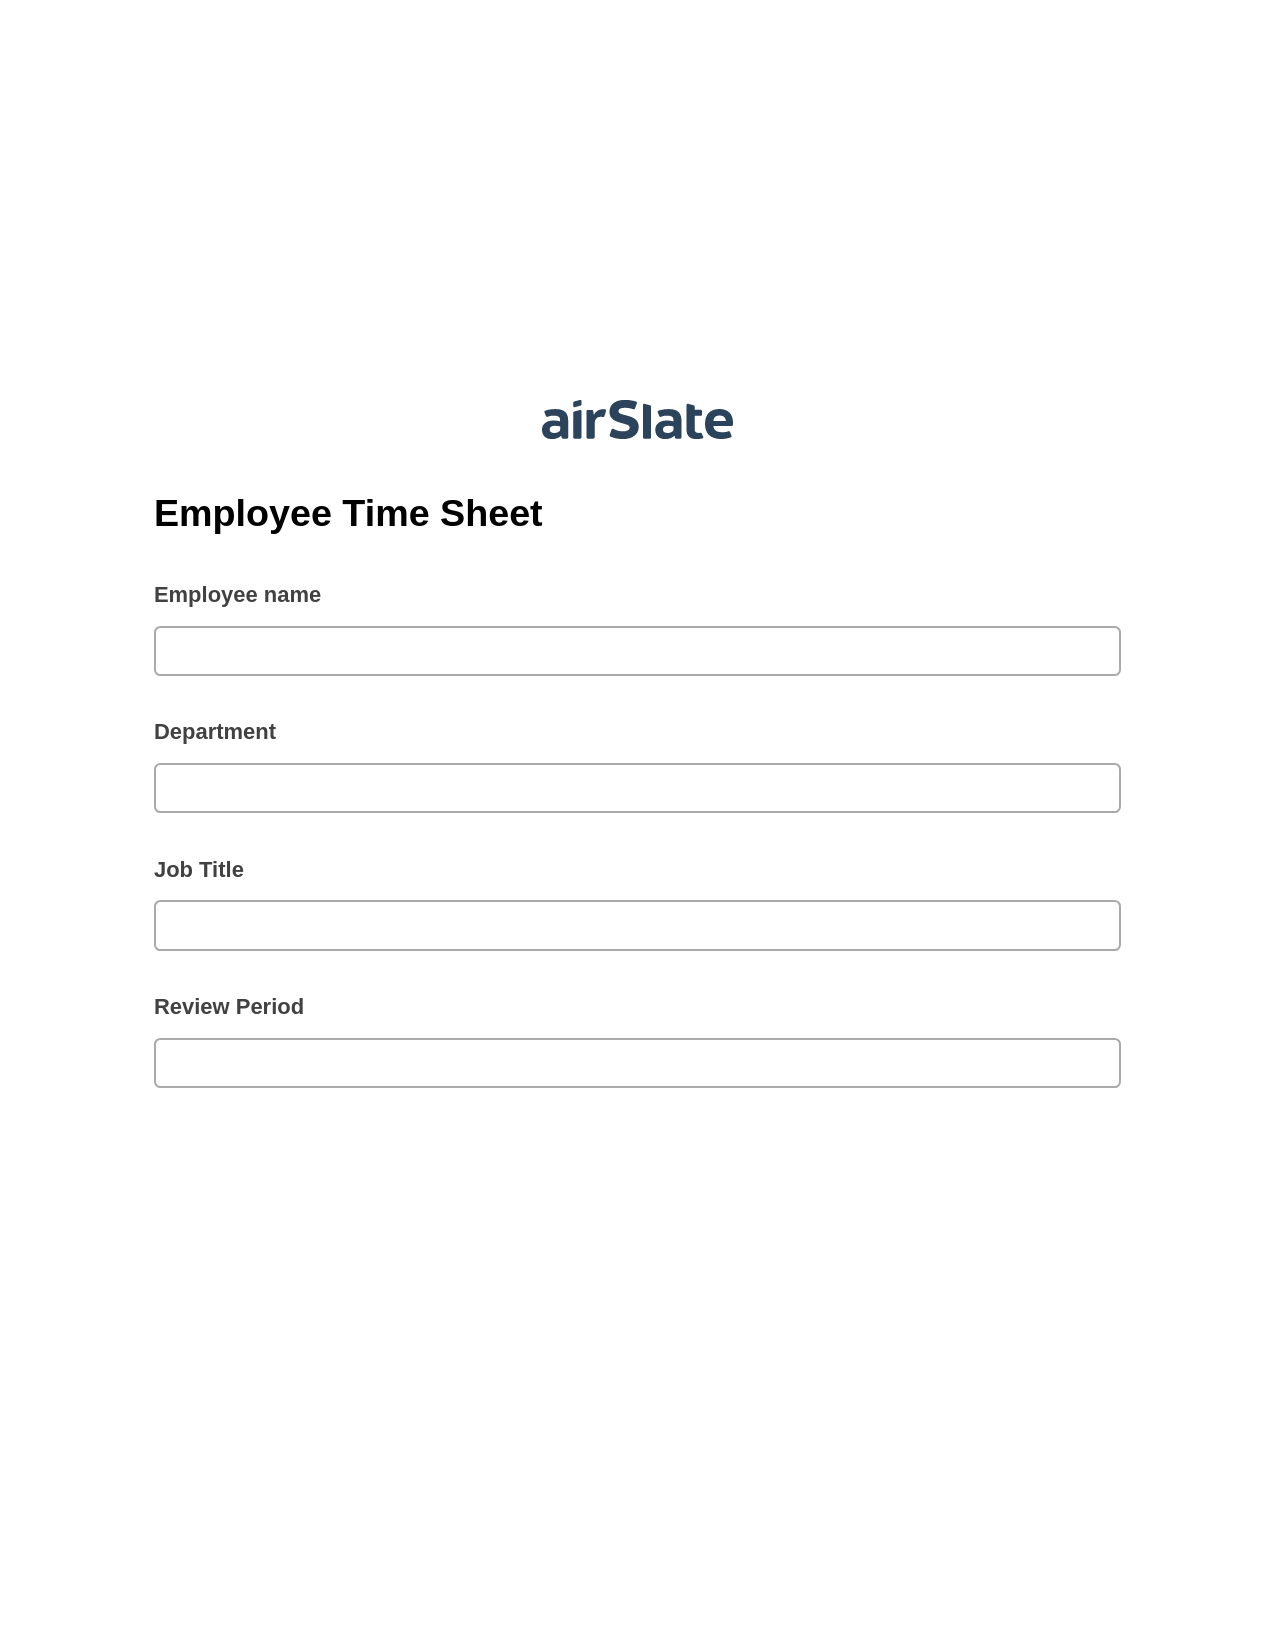 Multirole Employee Time Sheet Pre-fill from MS Dynamics 365 Records, Create Salesforce Records Bot, Export to WebMerge Bot